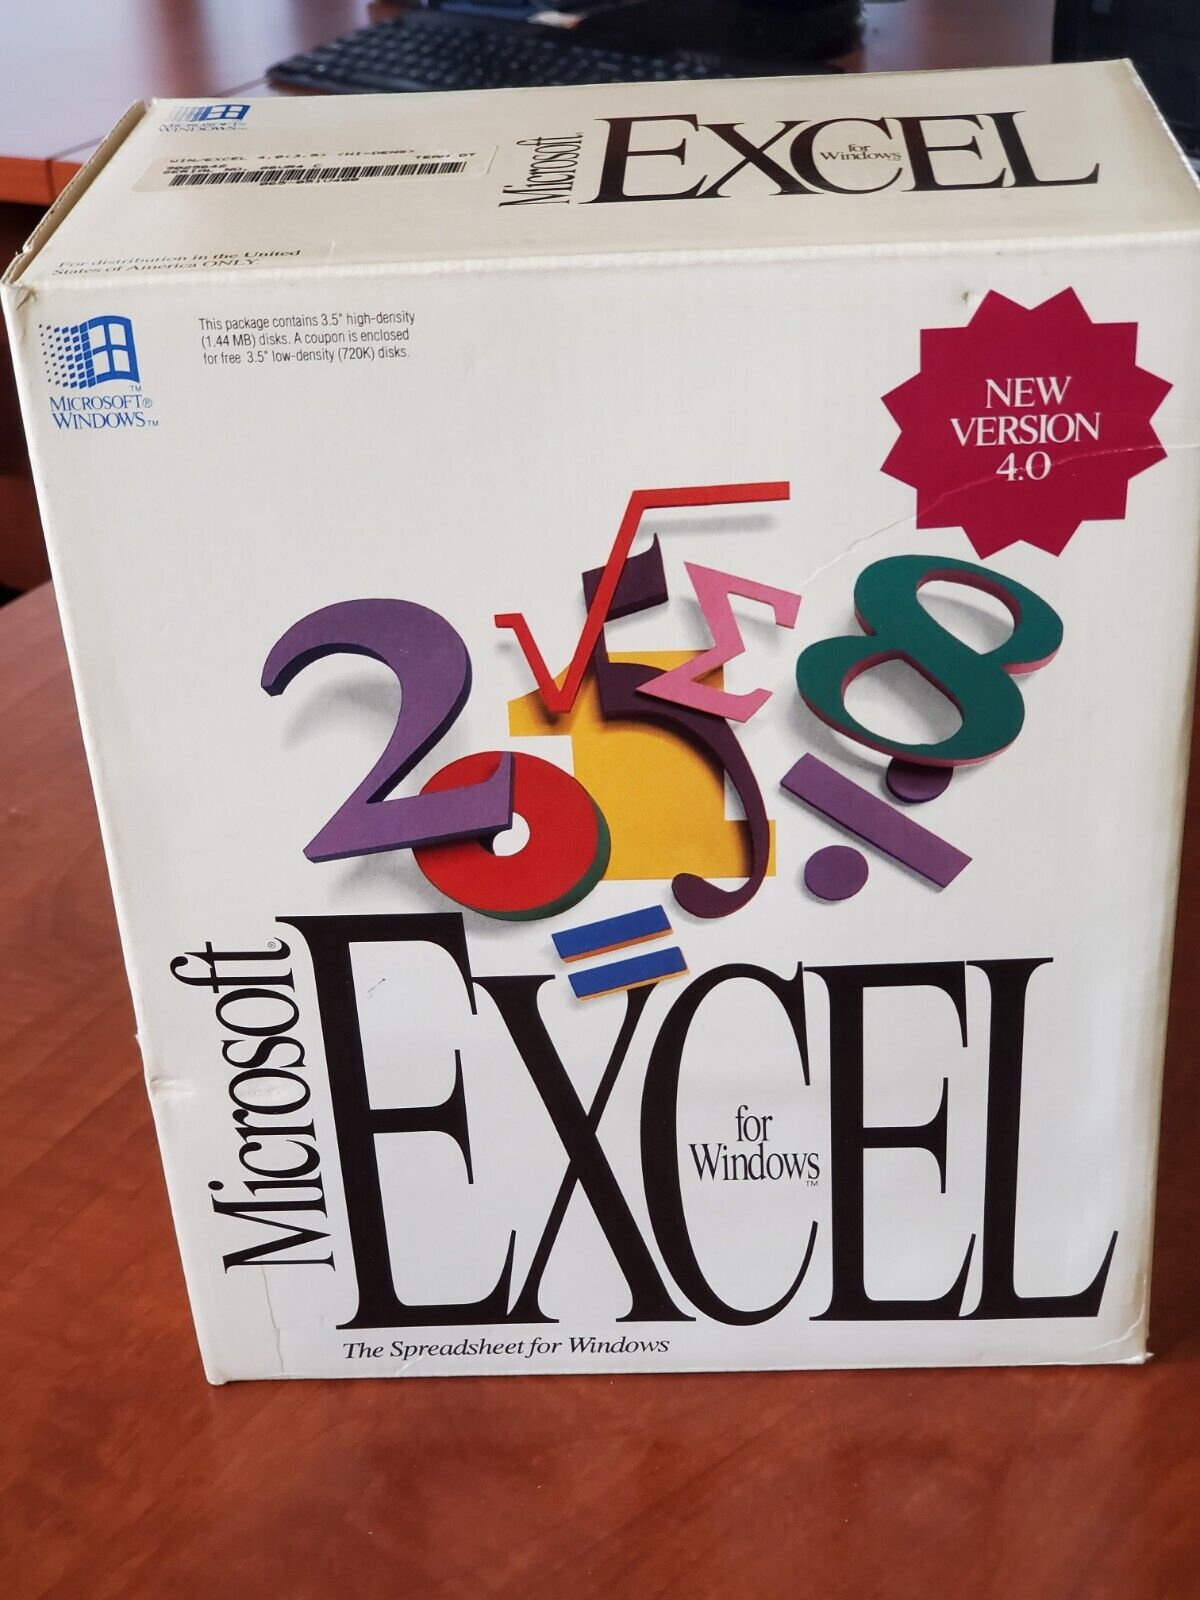 MICROSOFT EXCEL 4.0 for Windows BOX SET 0392 P/N 28949 on Floppies - Tested